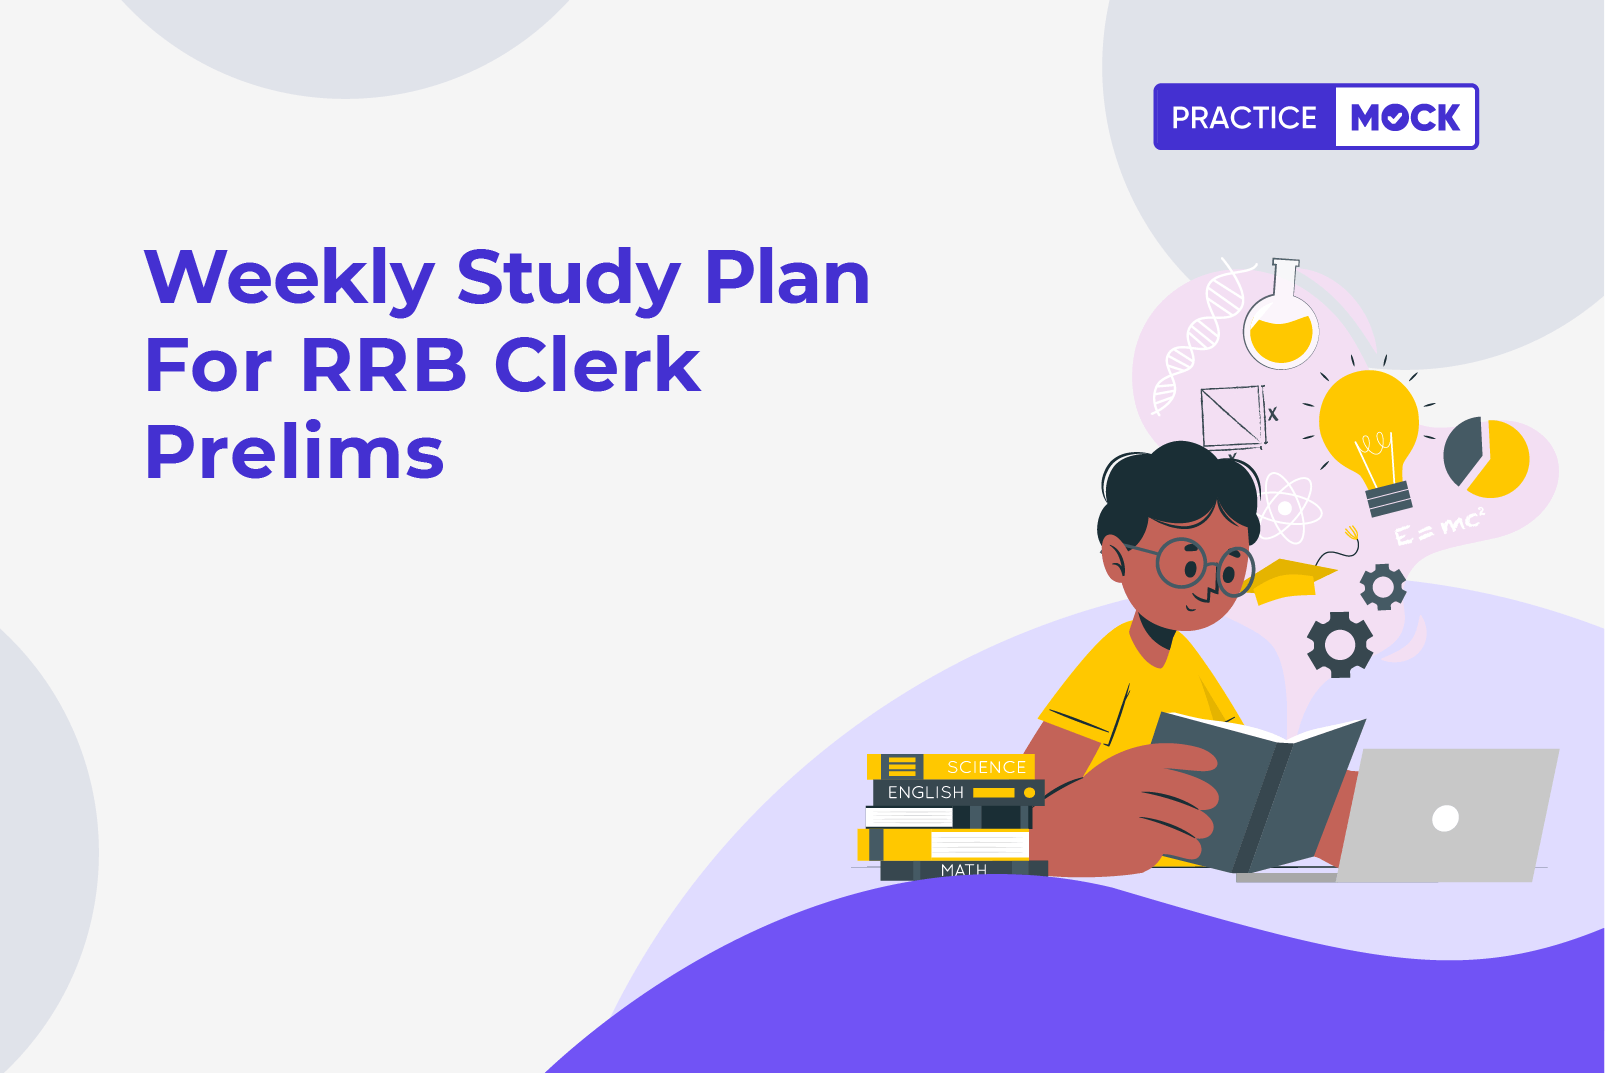 Weekly Study Plan for RRB Clerk Prelims